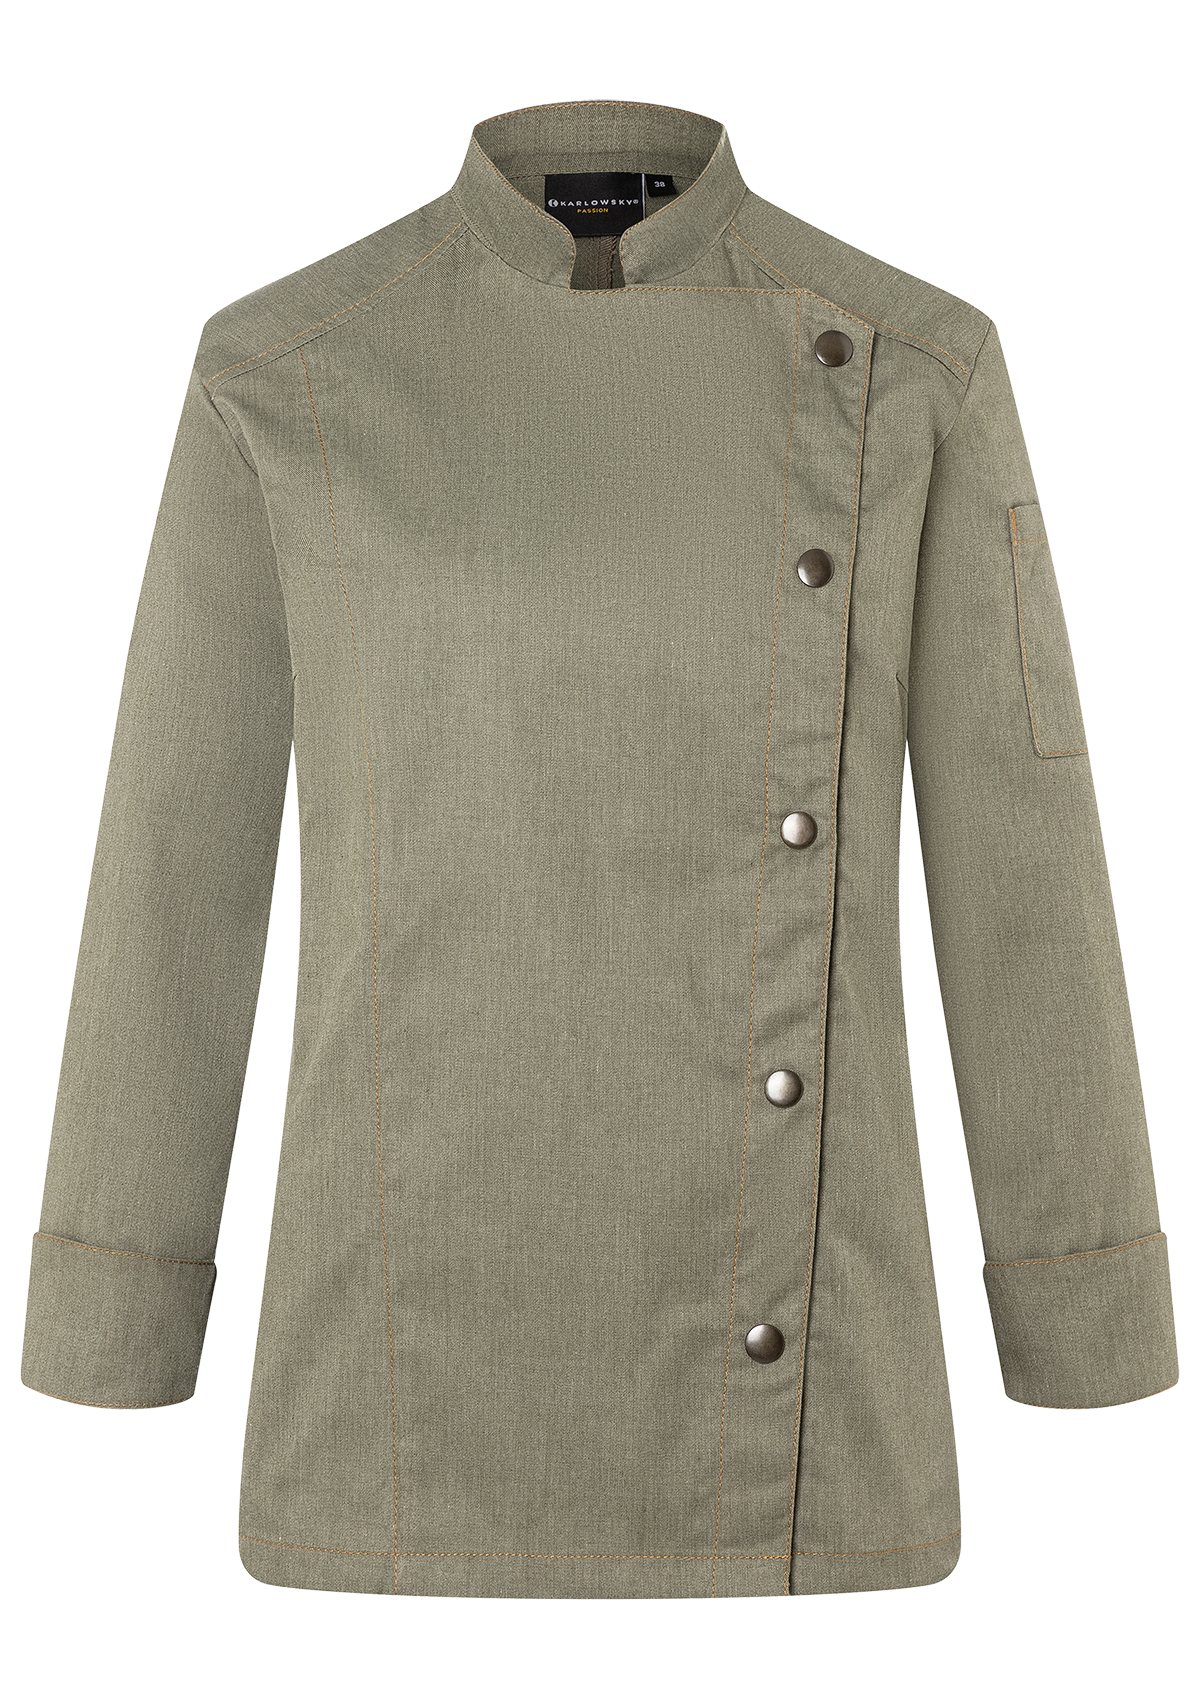 Double-Breasted & Long-Sleeved Chef's Jacket Jeans-Style For Women